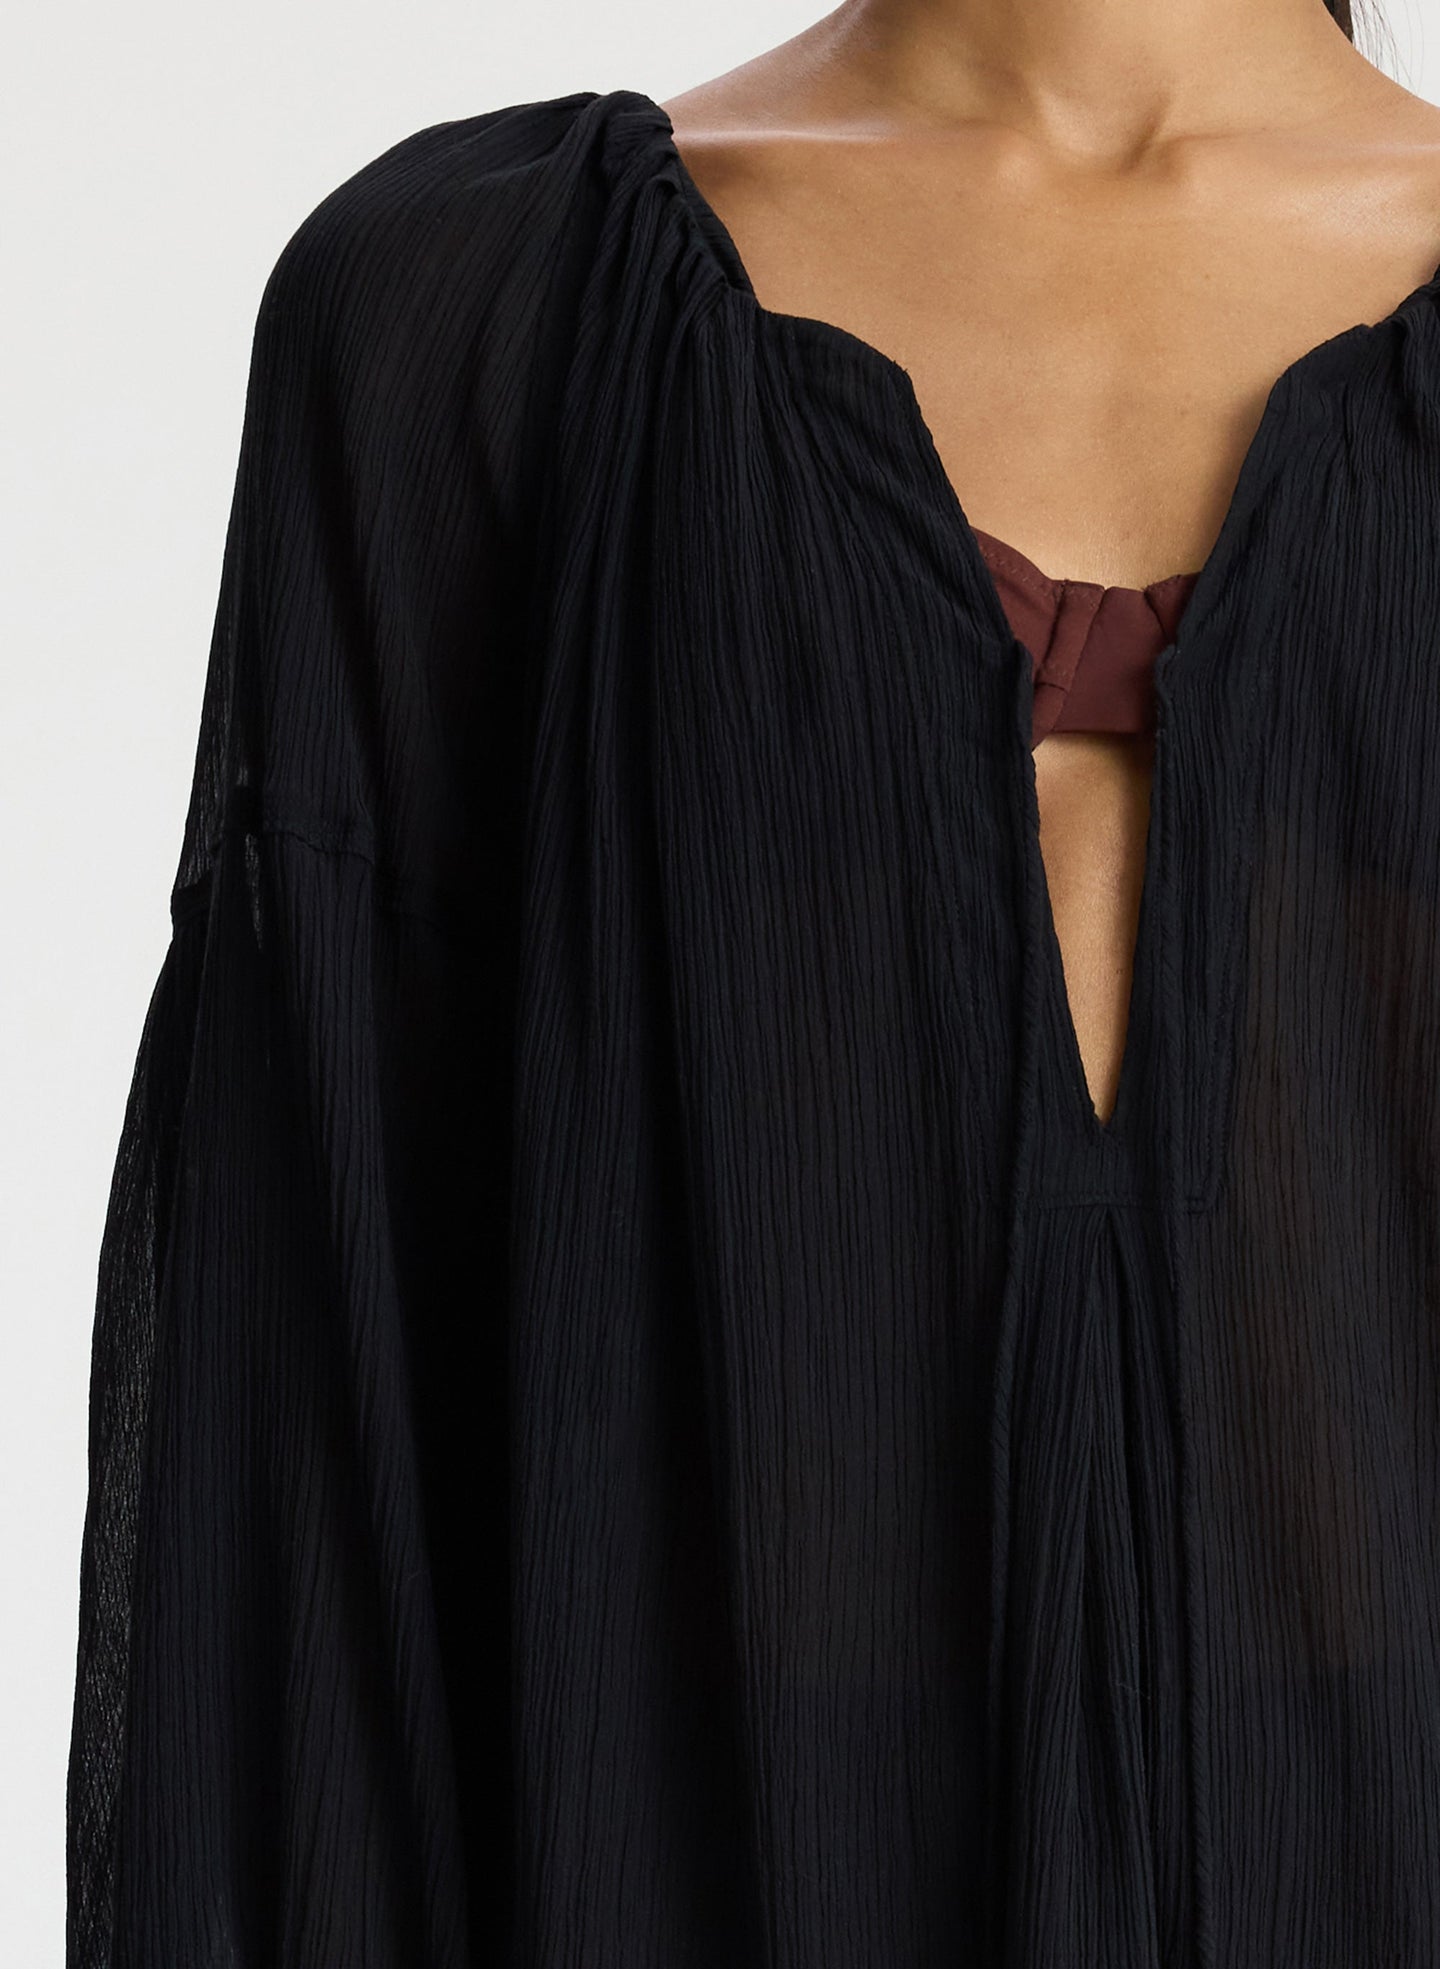 detail of woman wearing short black swim cover up